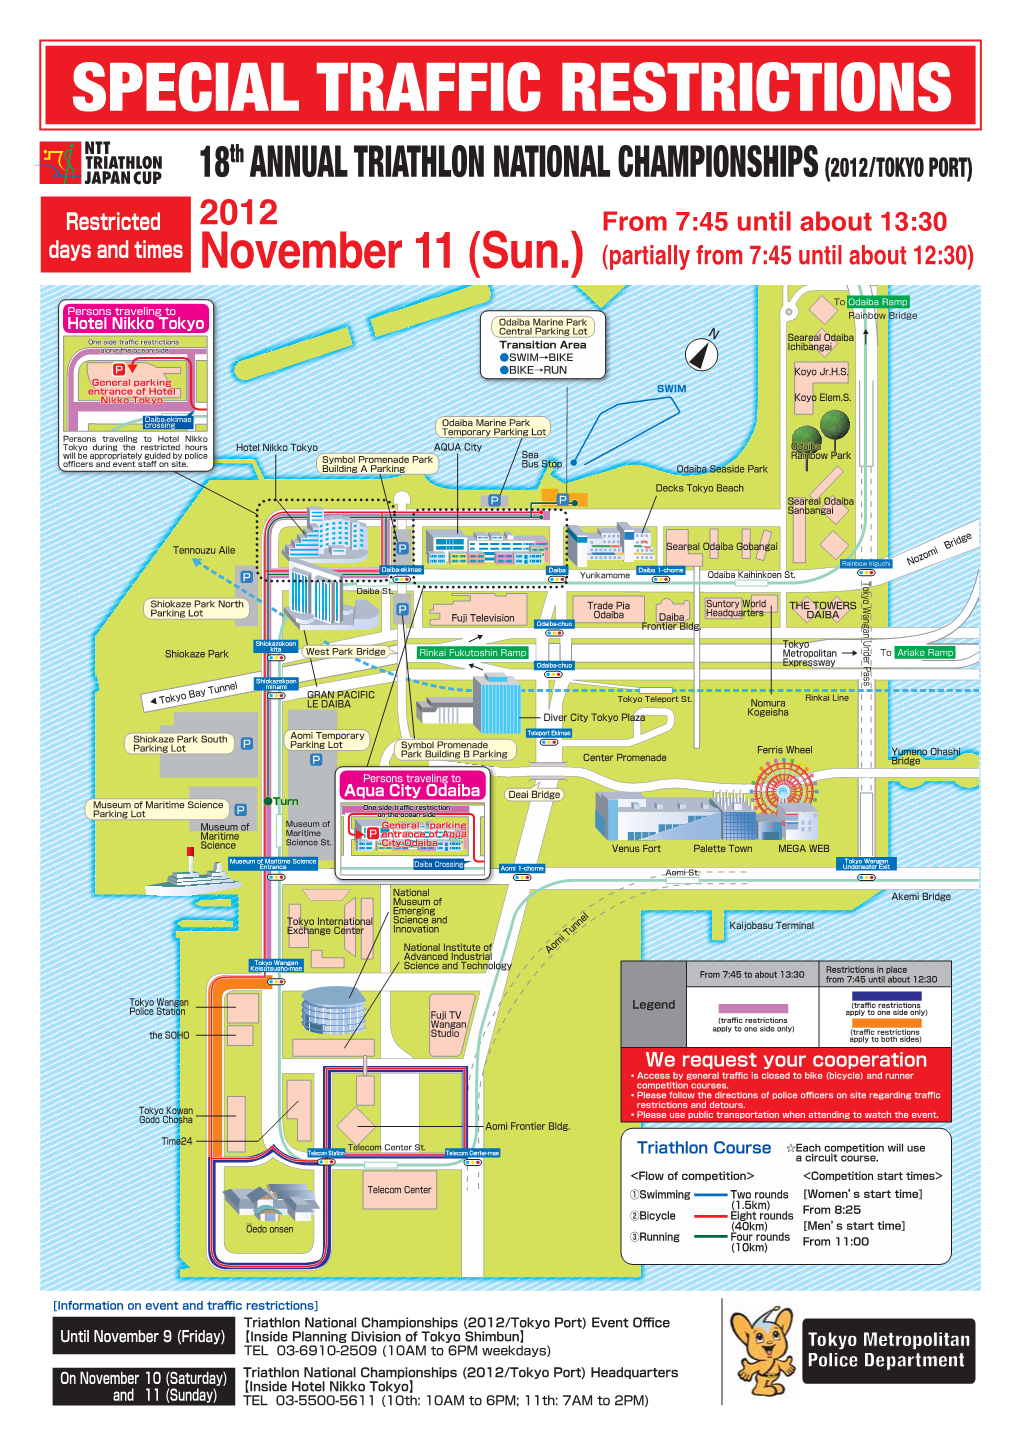 SPECIAL TRAFFIC RESTRICTIONS Th 18 ANNUAL TRIATHLON NATIONAL CHAMPIONSHIPS (2012/TOKYO PORT)